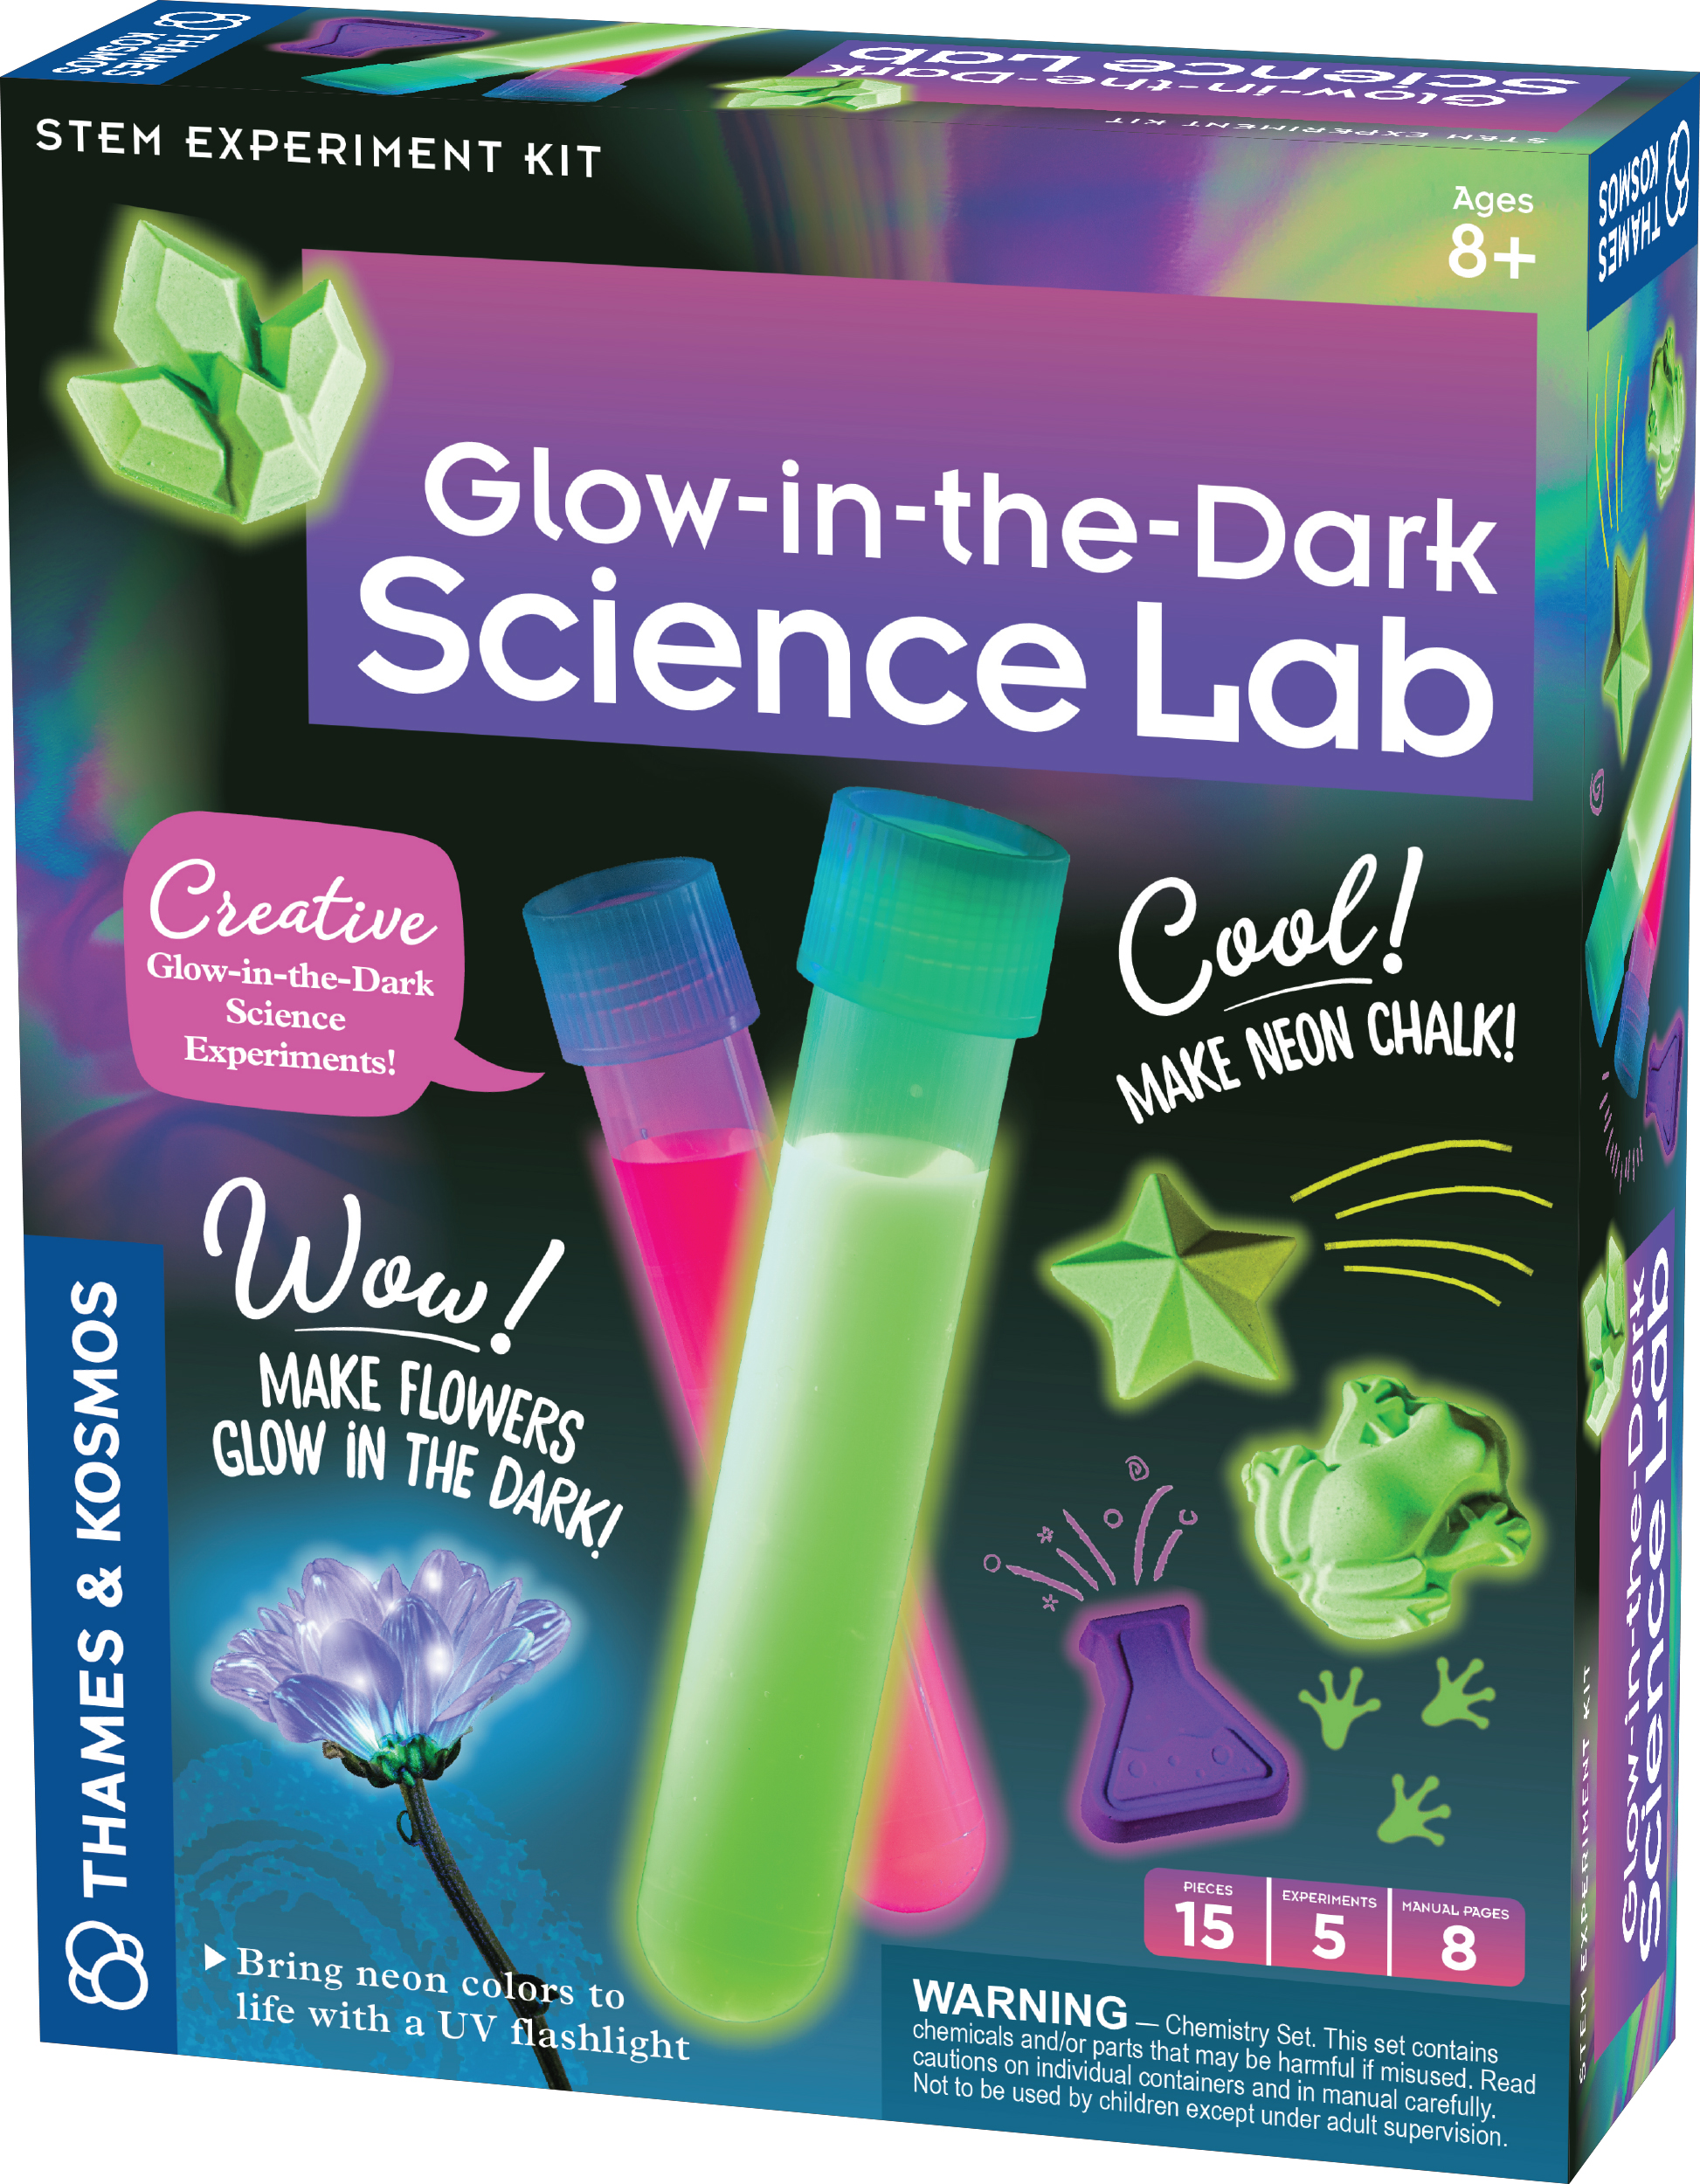 Glow in the Dark Science Lab Product Image Downloads